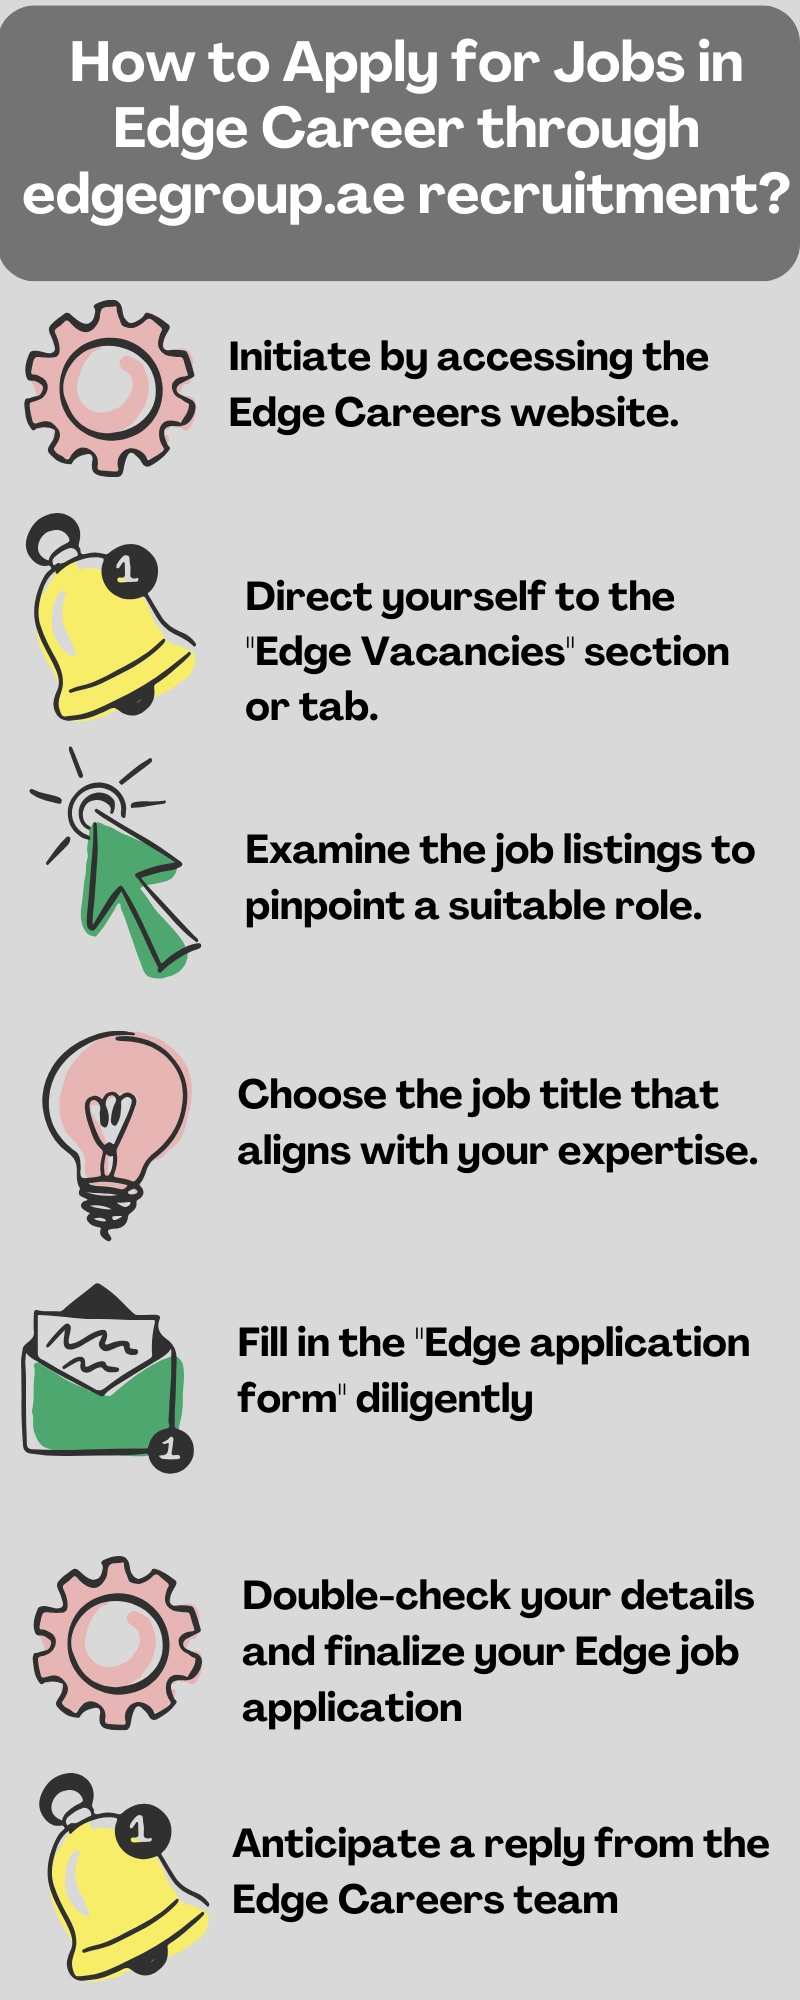 How to Apply for Jobs in Edge Career through edgegroup.ae recruitment